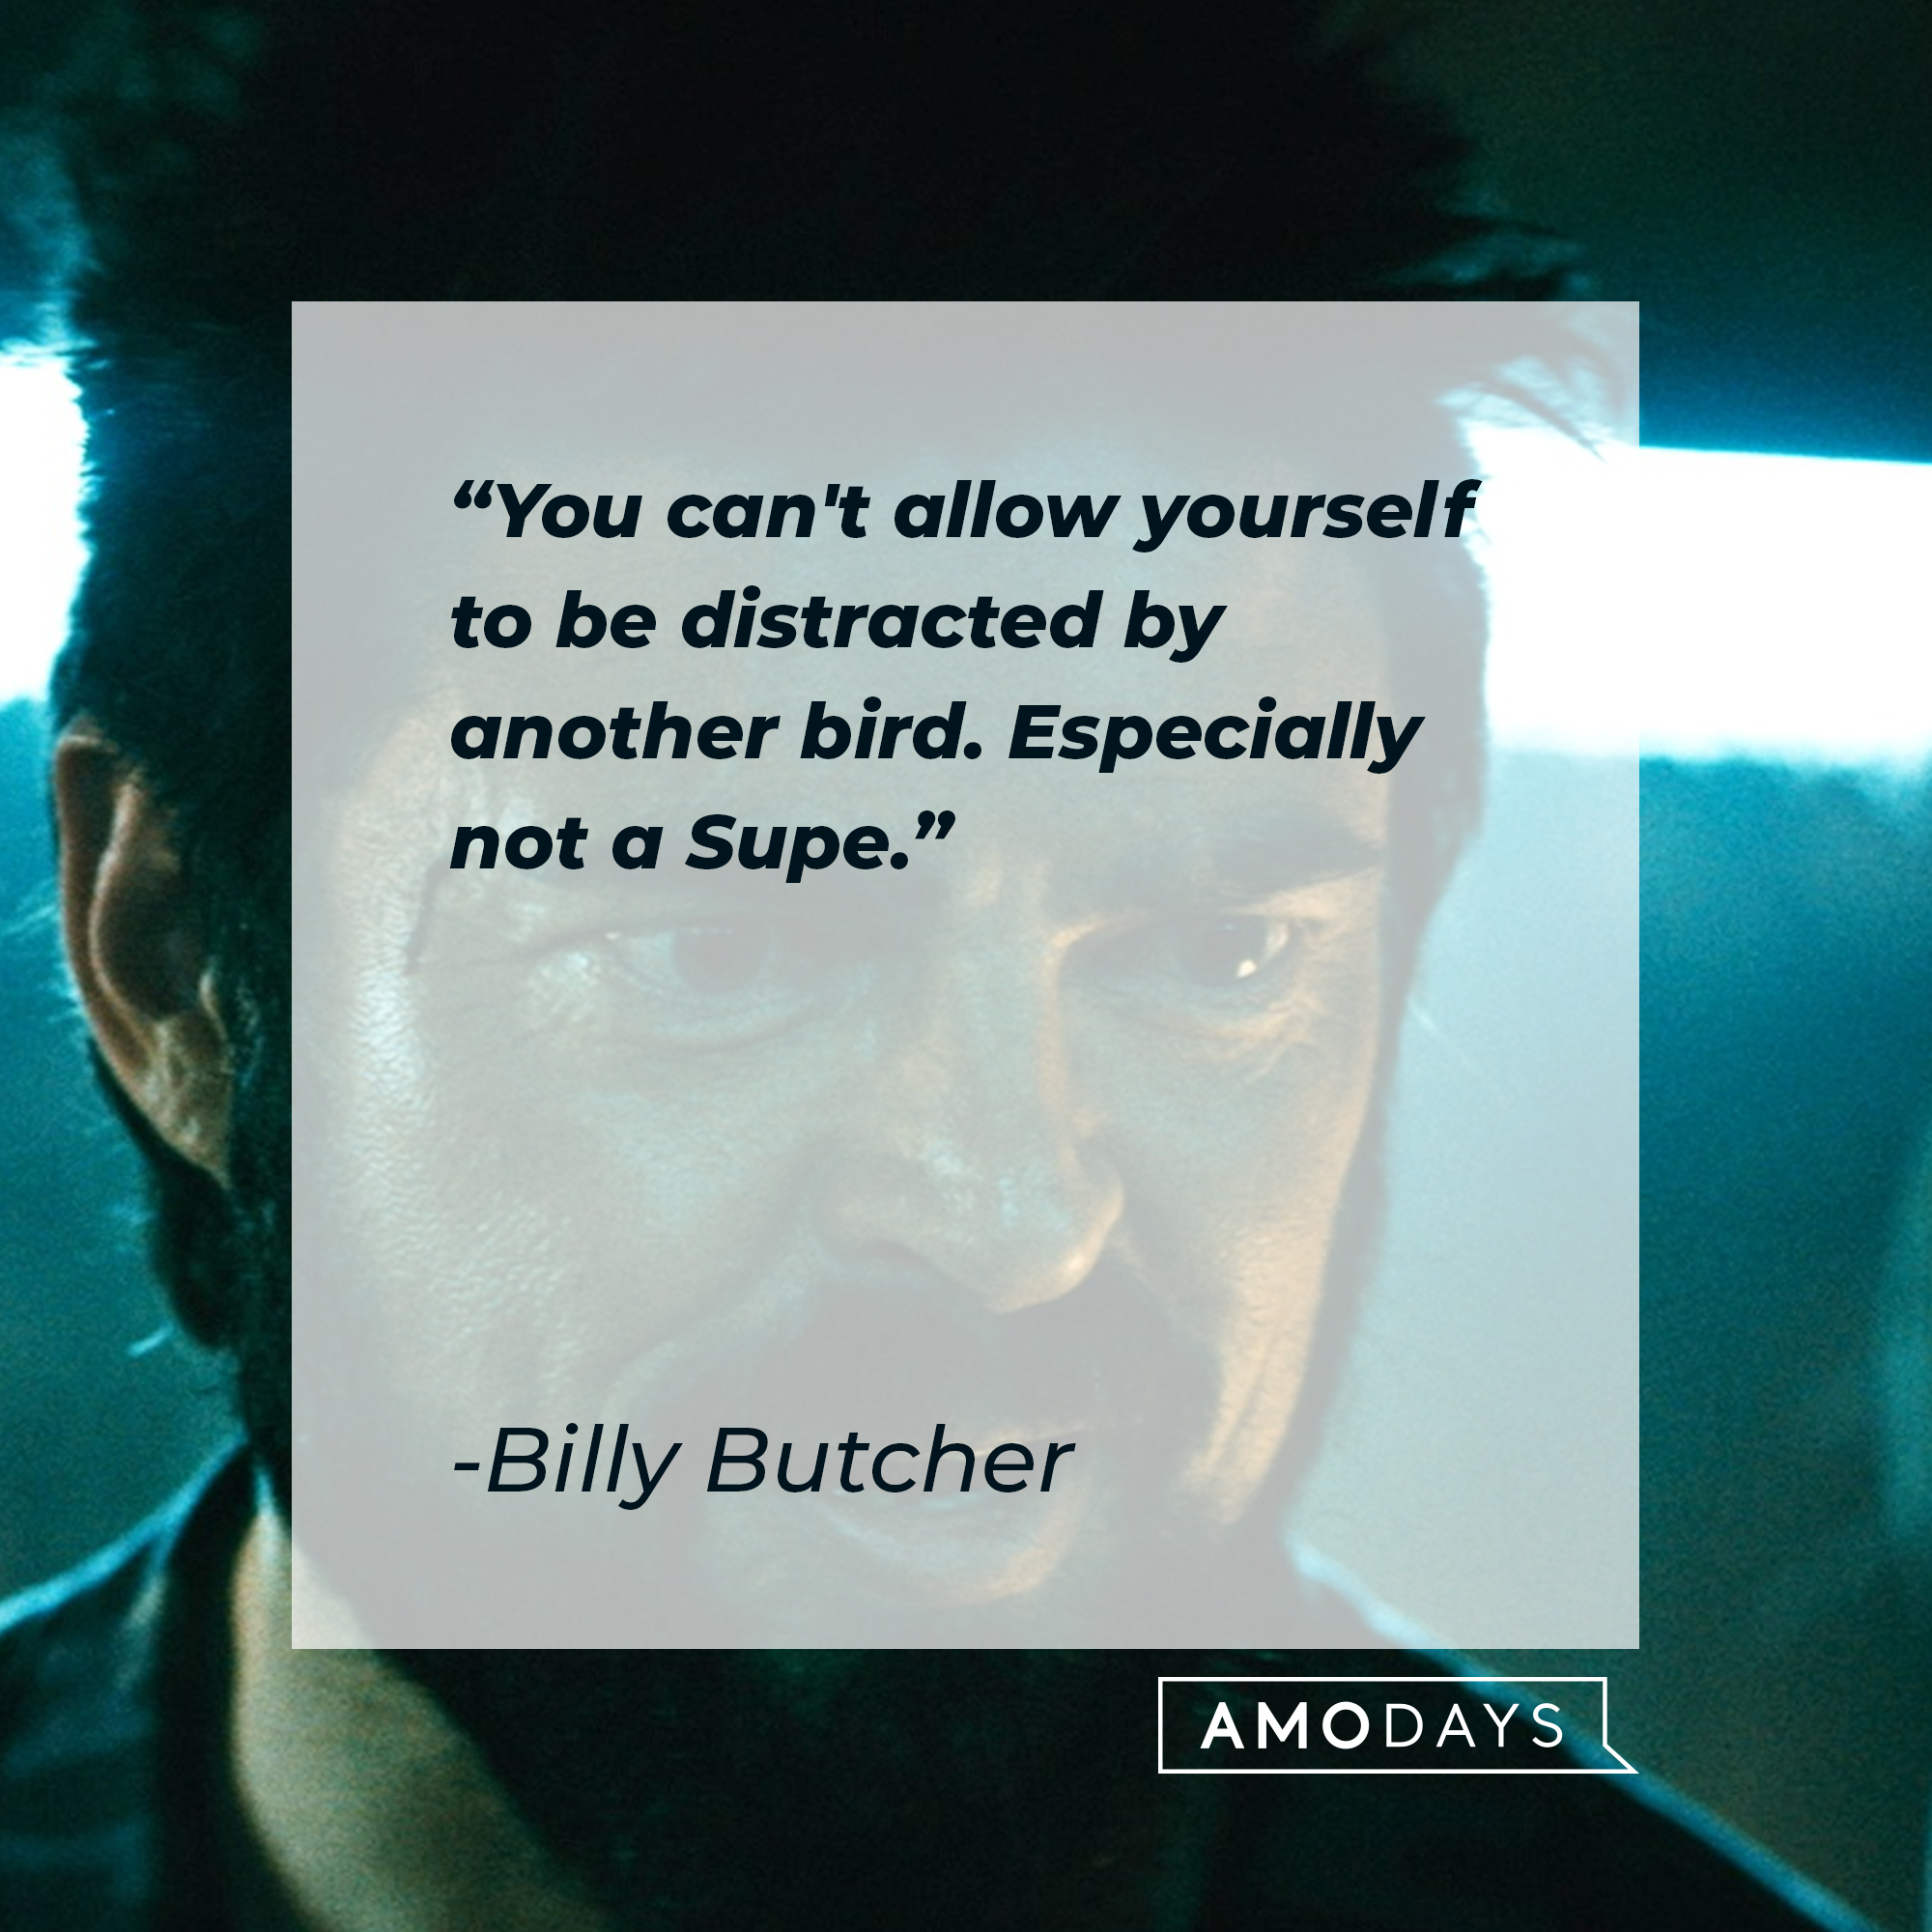 Billy Butcher's quote: "You can't allow yourself to be distracted by another bird. Especially not a Supe." | Source: Facebook.com/TheBoysTV